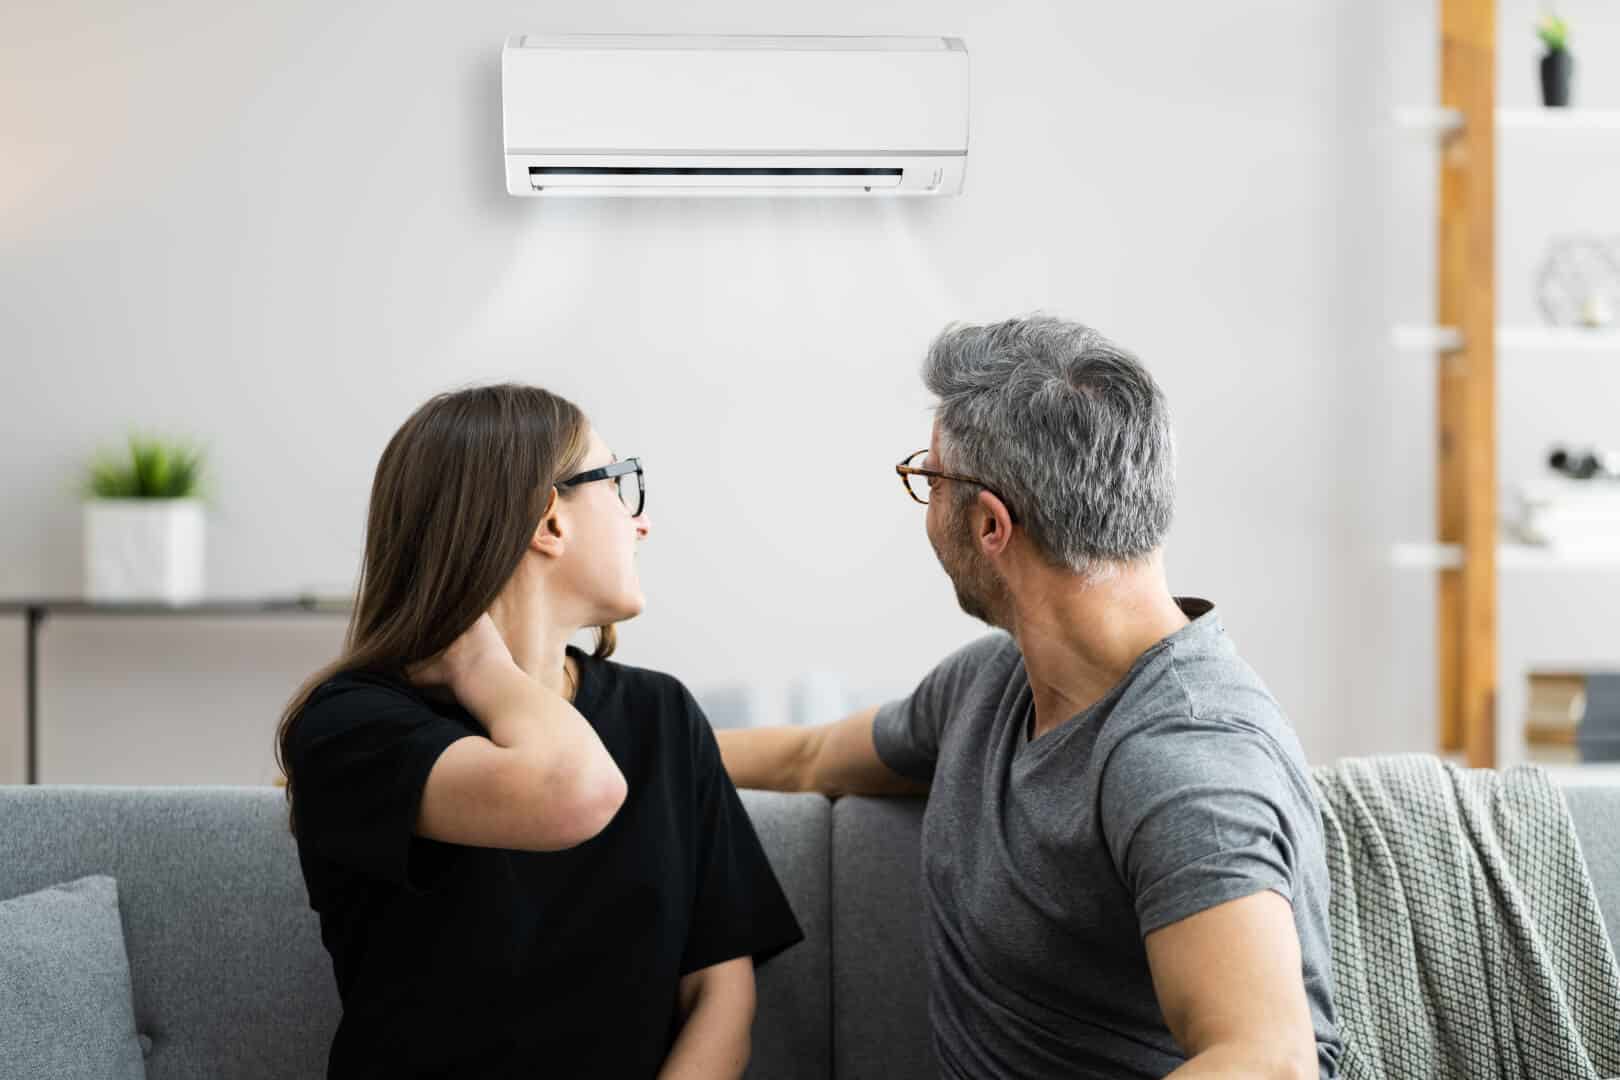 What signs indicate the need for repairing your Ac